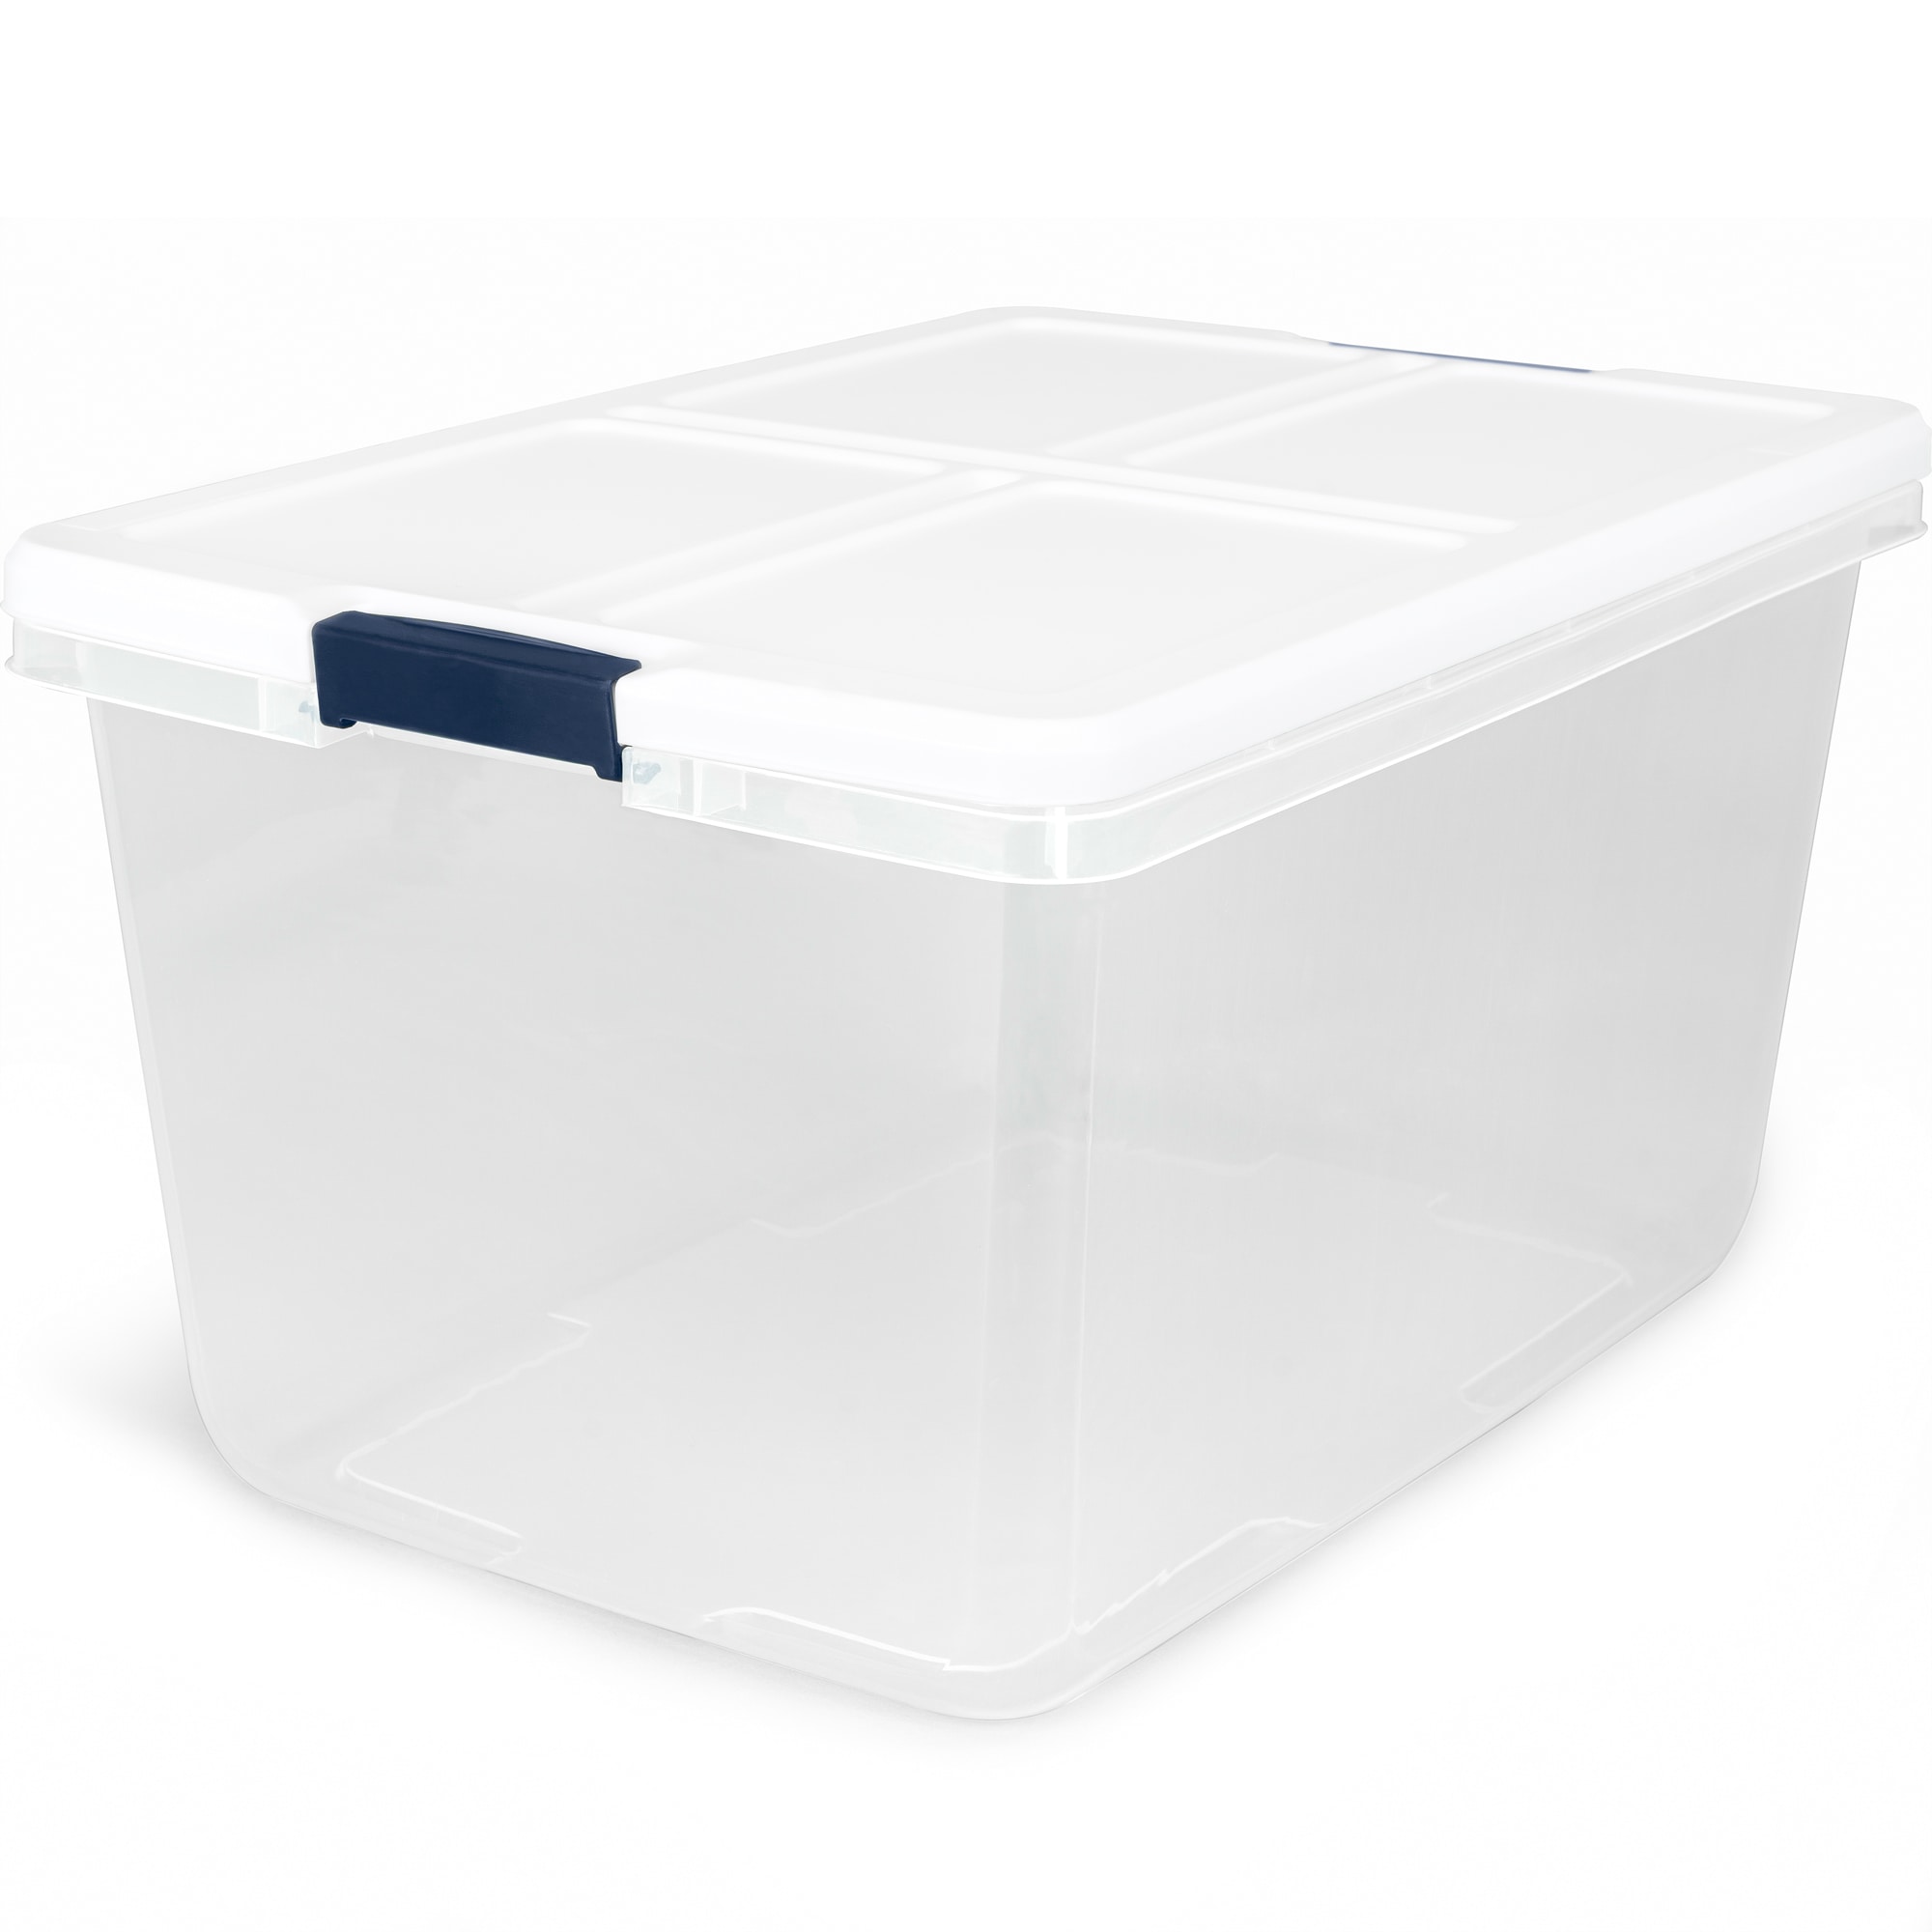 Underbed tote Baskets & Storage Containers at